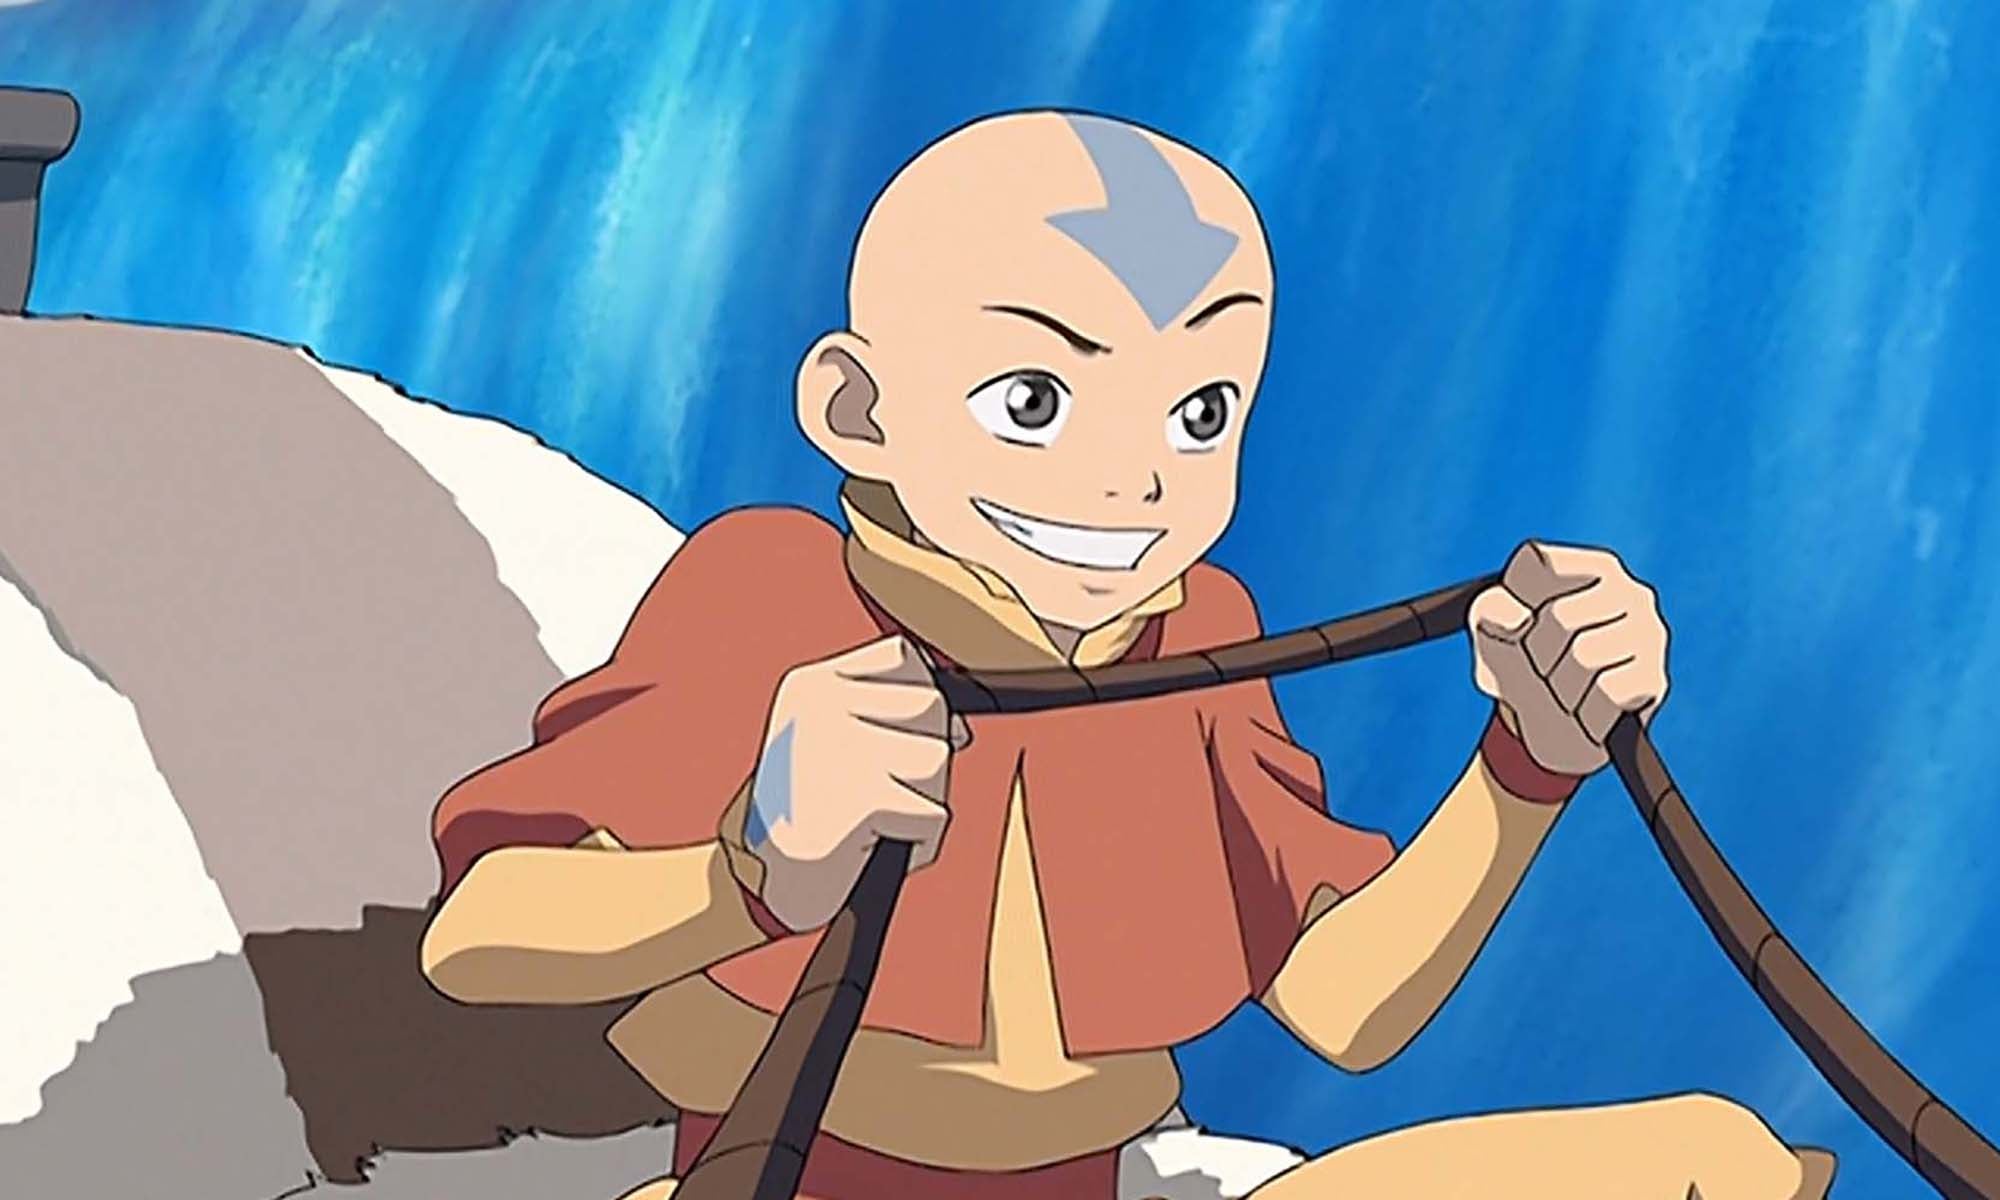 Avatar The Last Airbender  Where to Watch and Stream  TV Guide